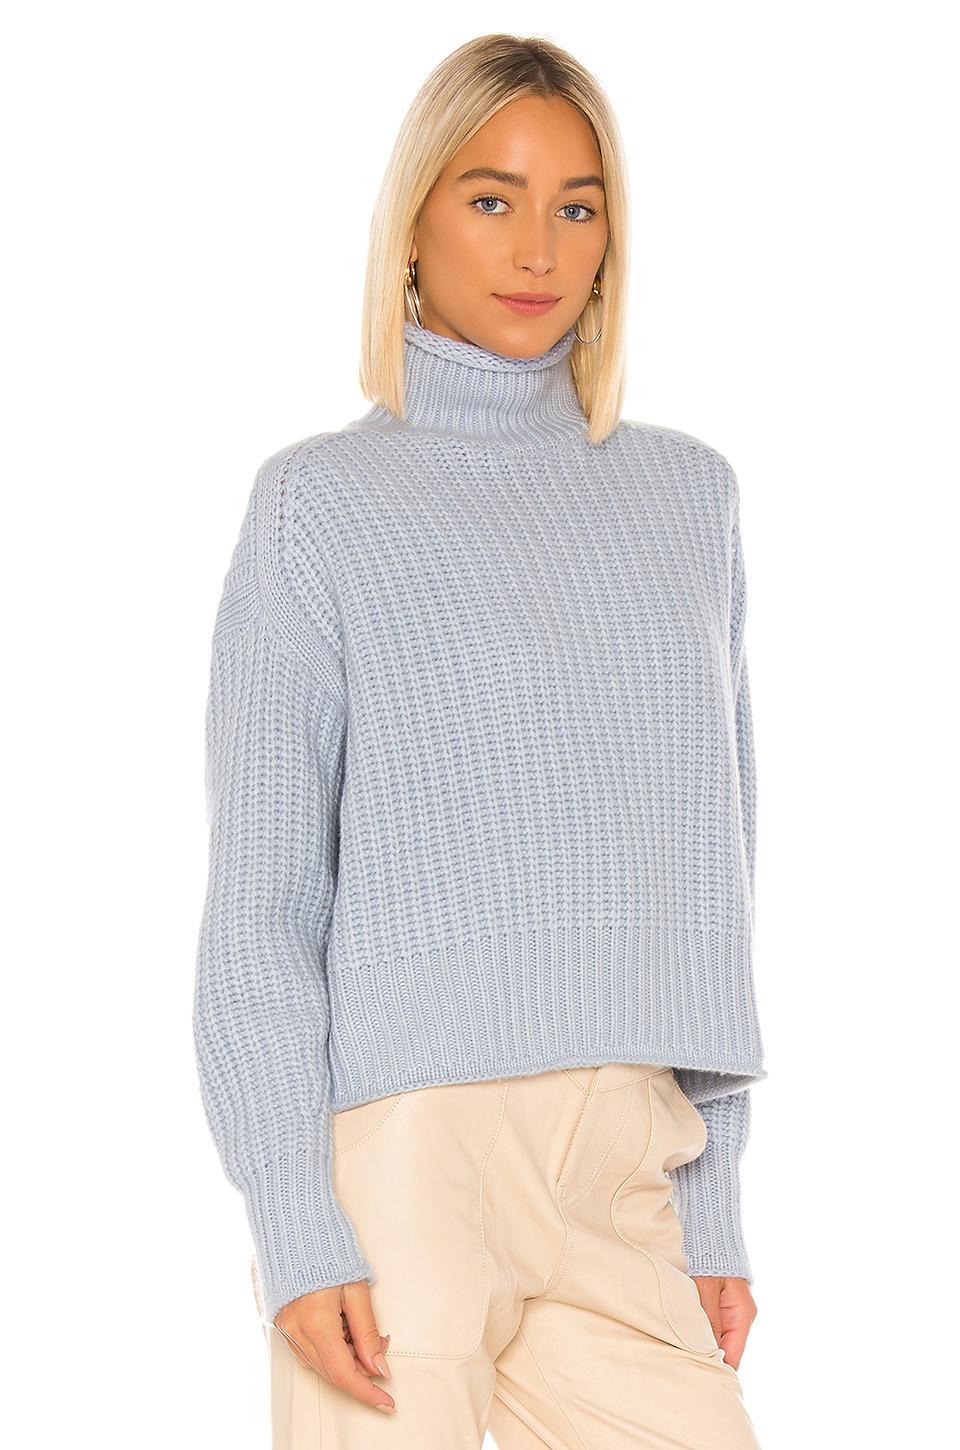 Autumn Cashmere Cashmere Chunky Shaker Mock Neck Sweater - Lyst